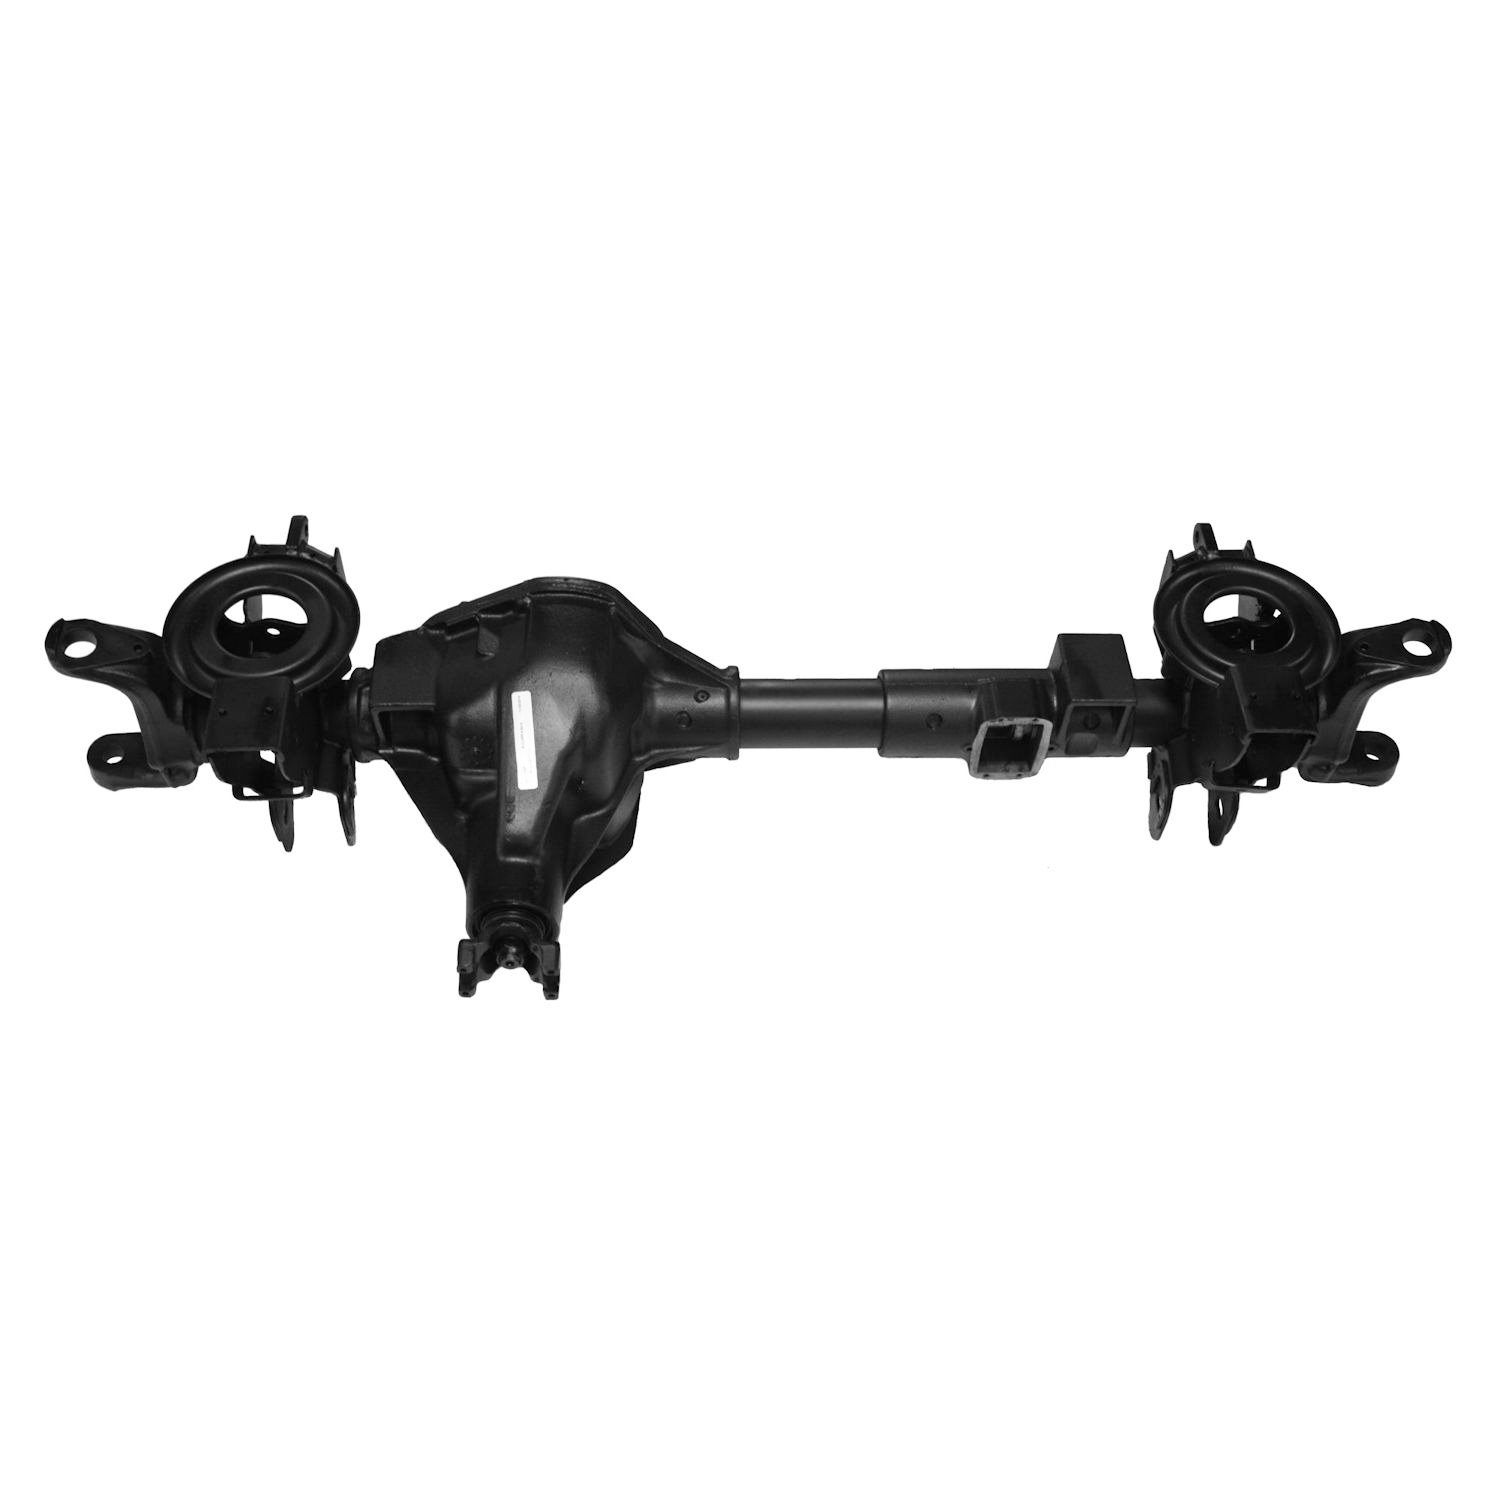 Remanufactured Complete Axle Assy for Dana 60 1999 Ram 2500 & 3500 3.54 with 4 Wheel ABS